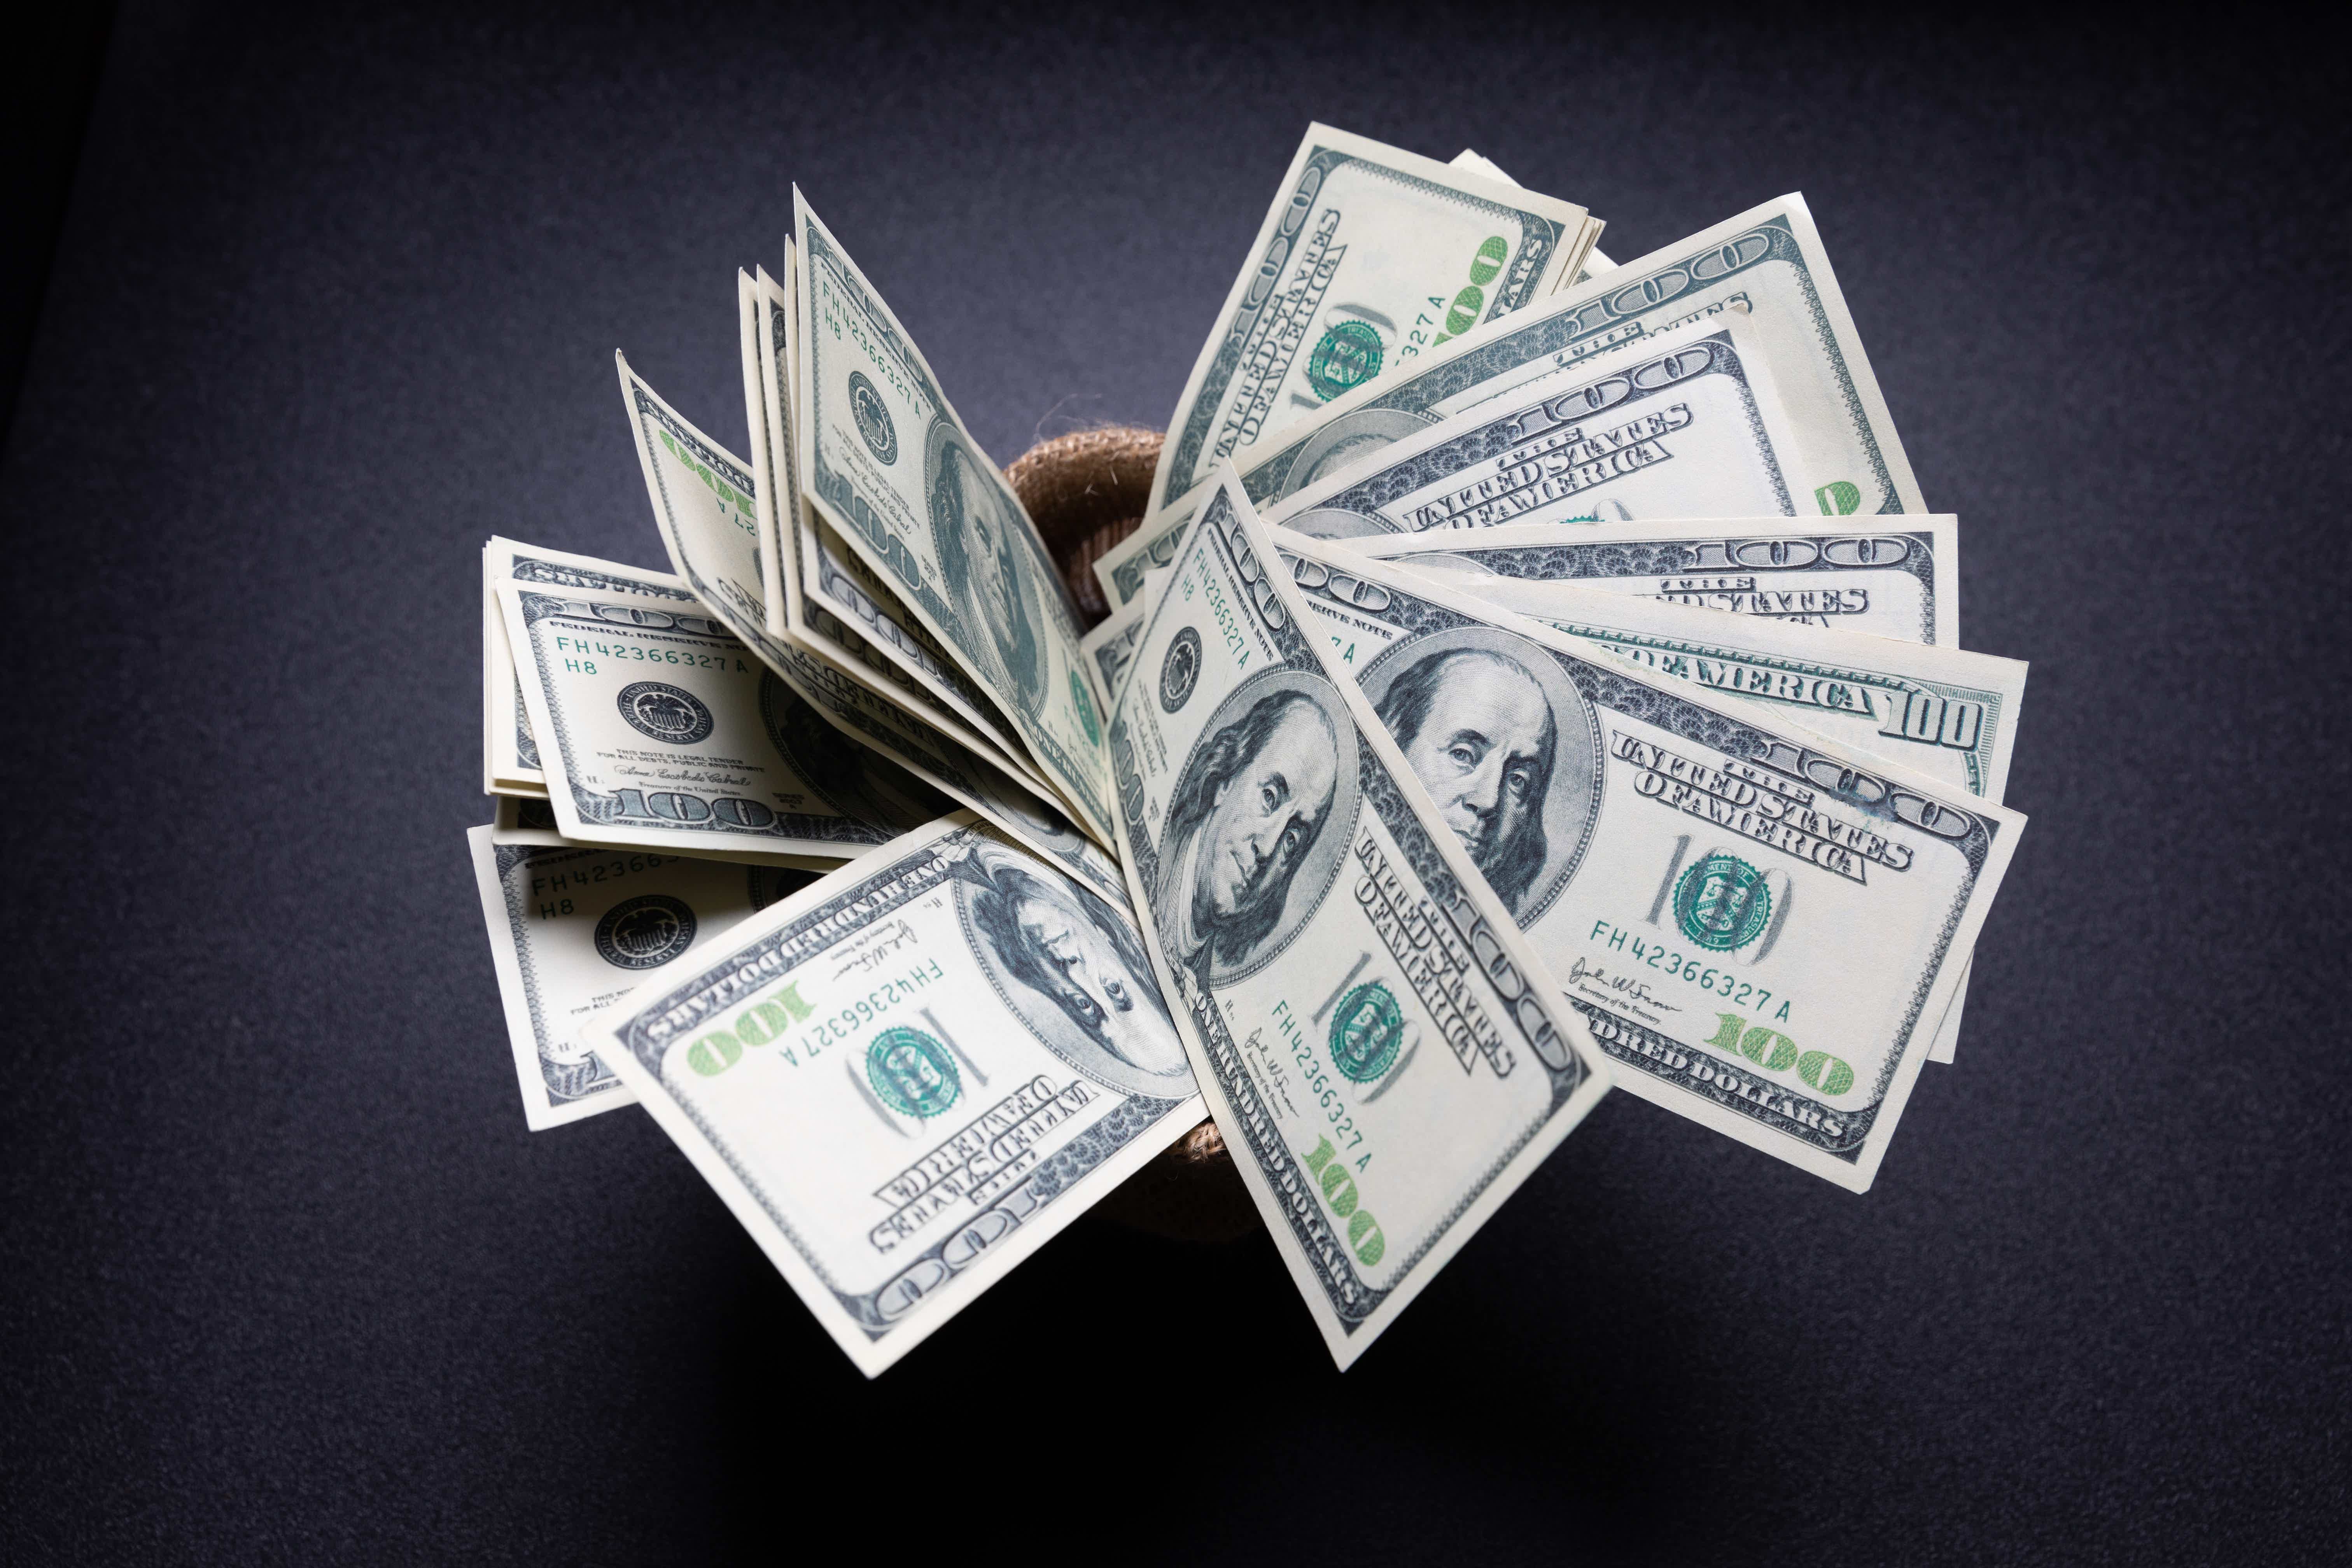 Need money fast? Read our post about how to get 50 dollars fast! Source: Freepik (jcomp)